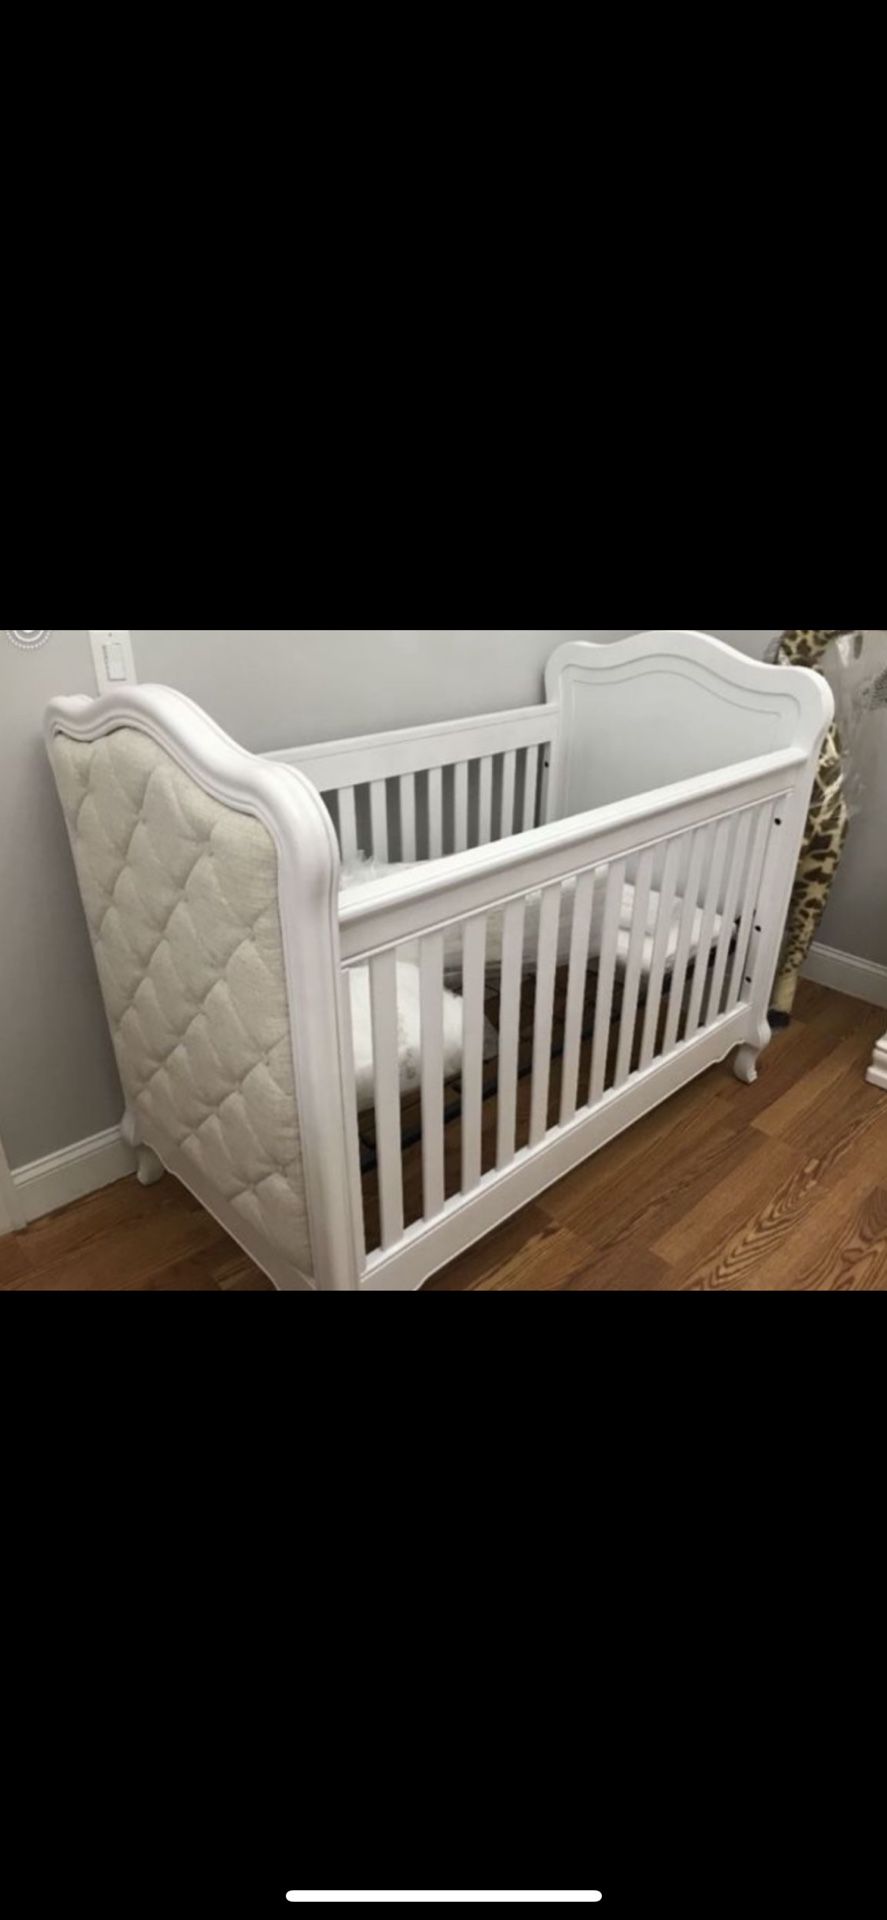 New Baby Crib For Sale 